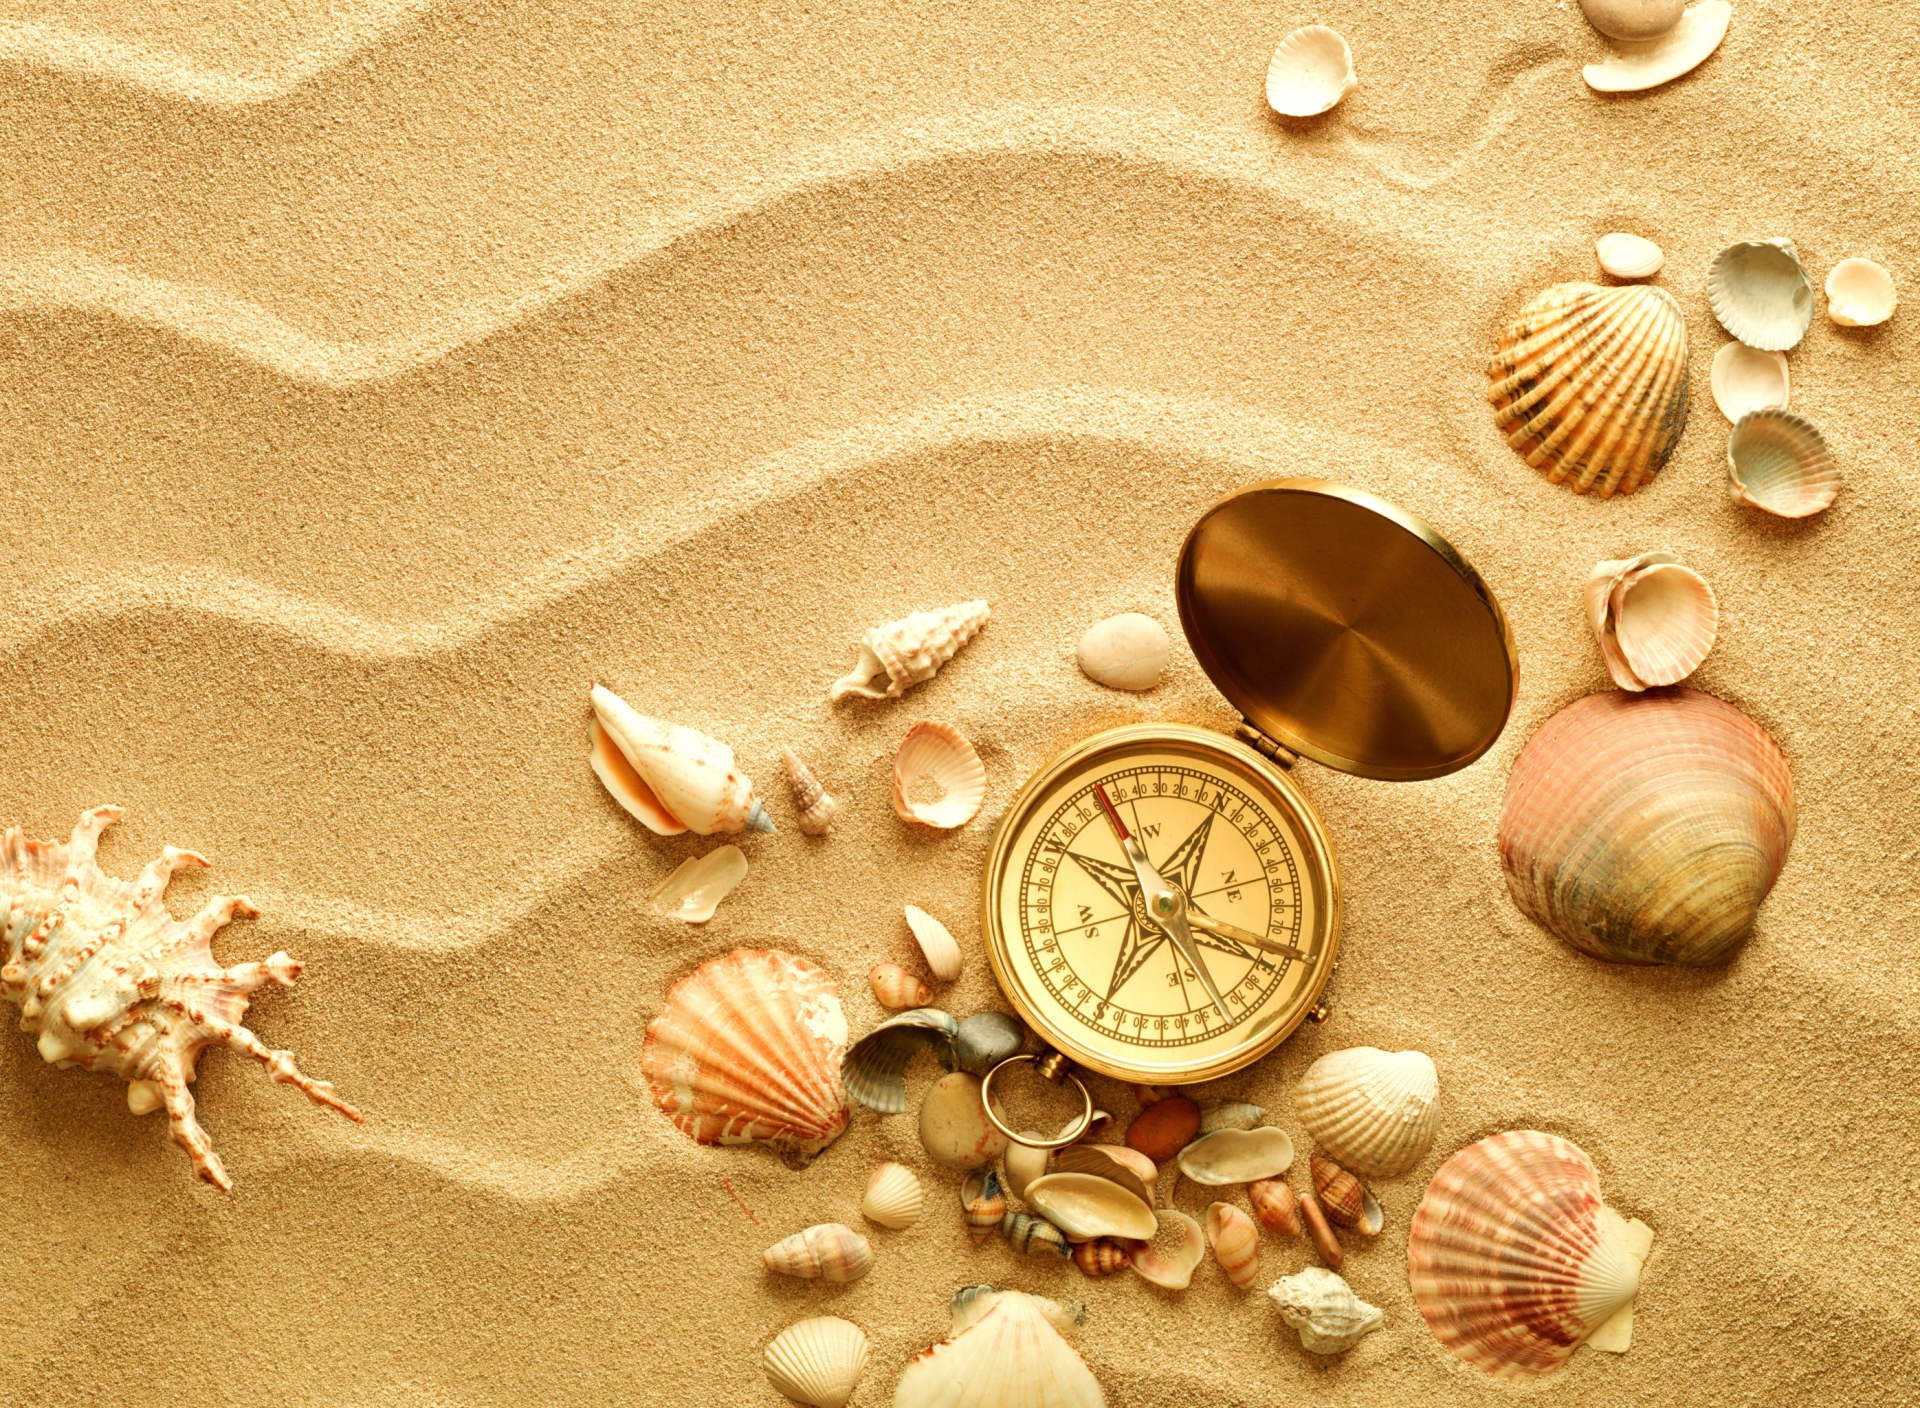 Compass And Shells On Sand wallpaper 1920x1408